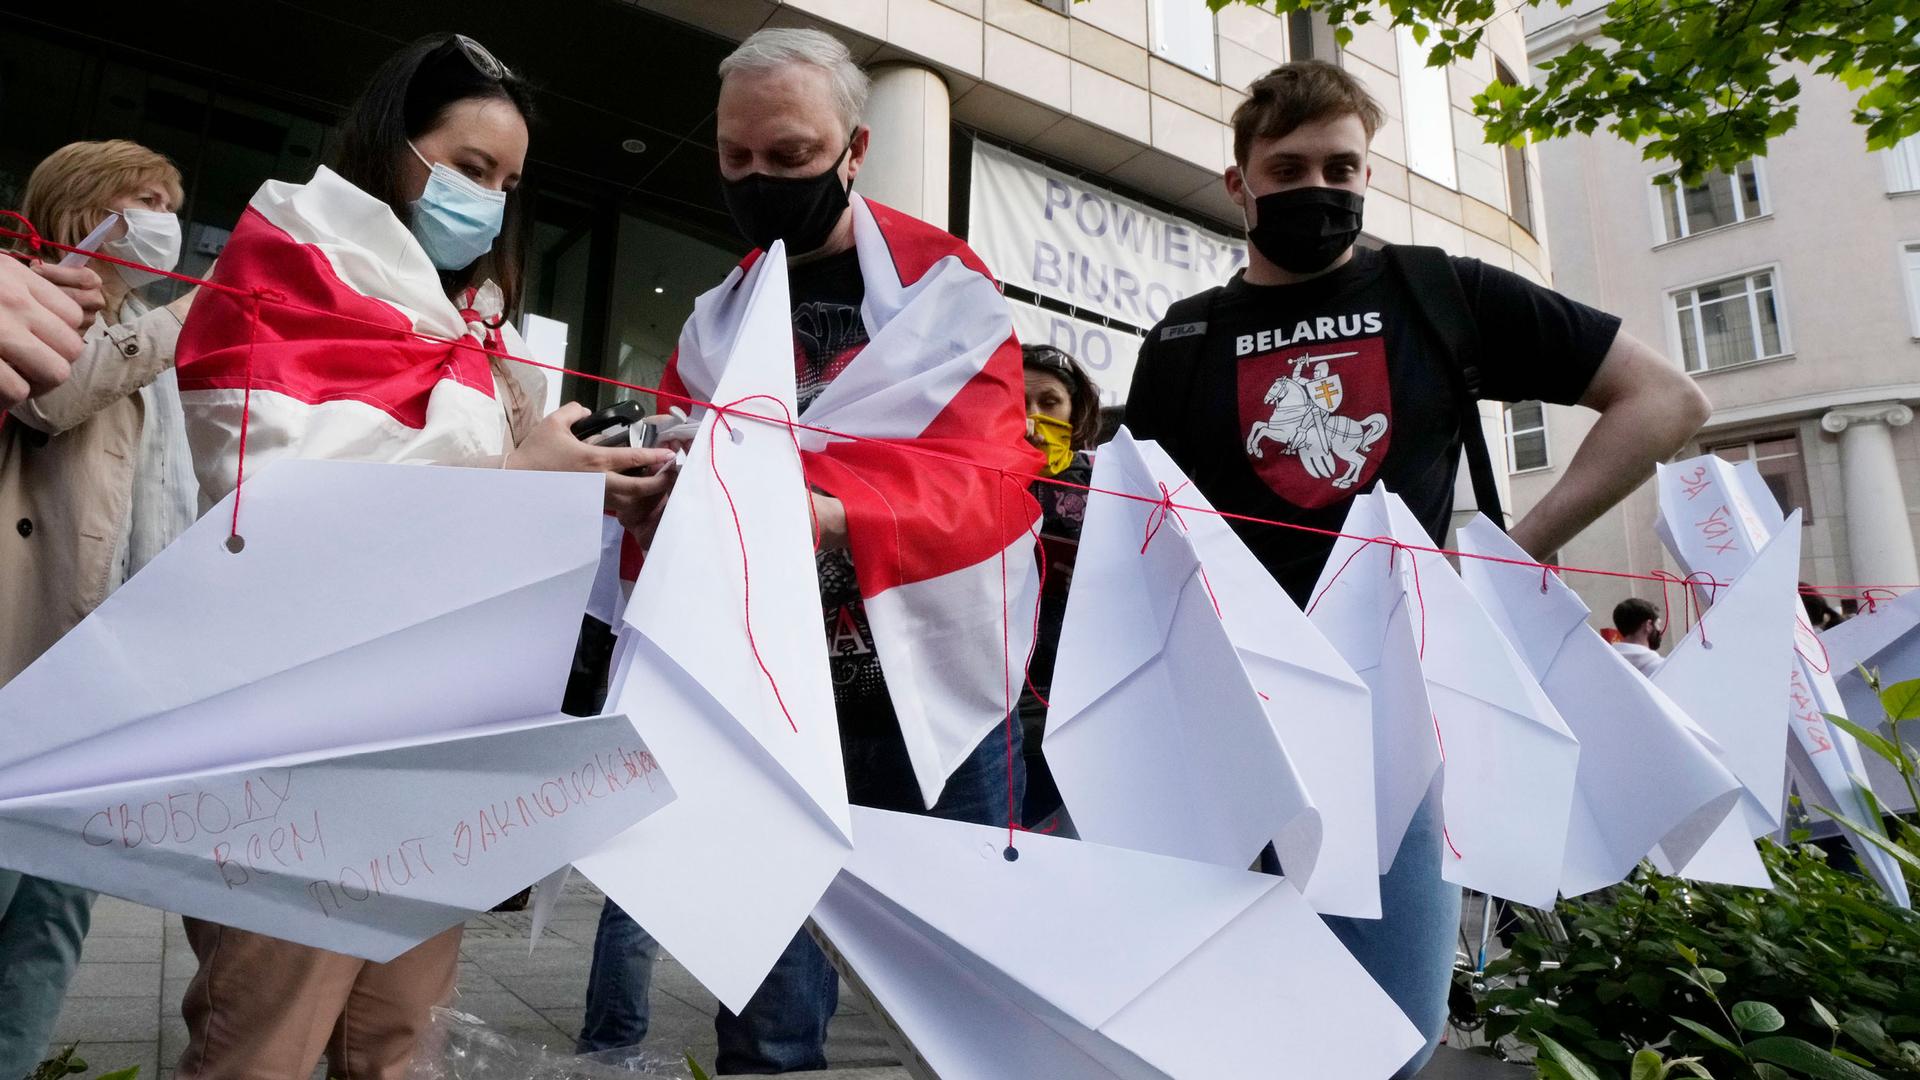 Several people are shown wearing protective face masks and standing behind a red string with several folded paper airplanes attached.